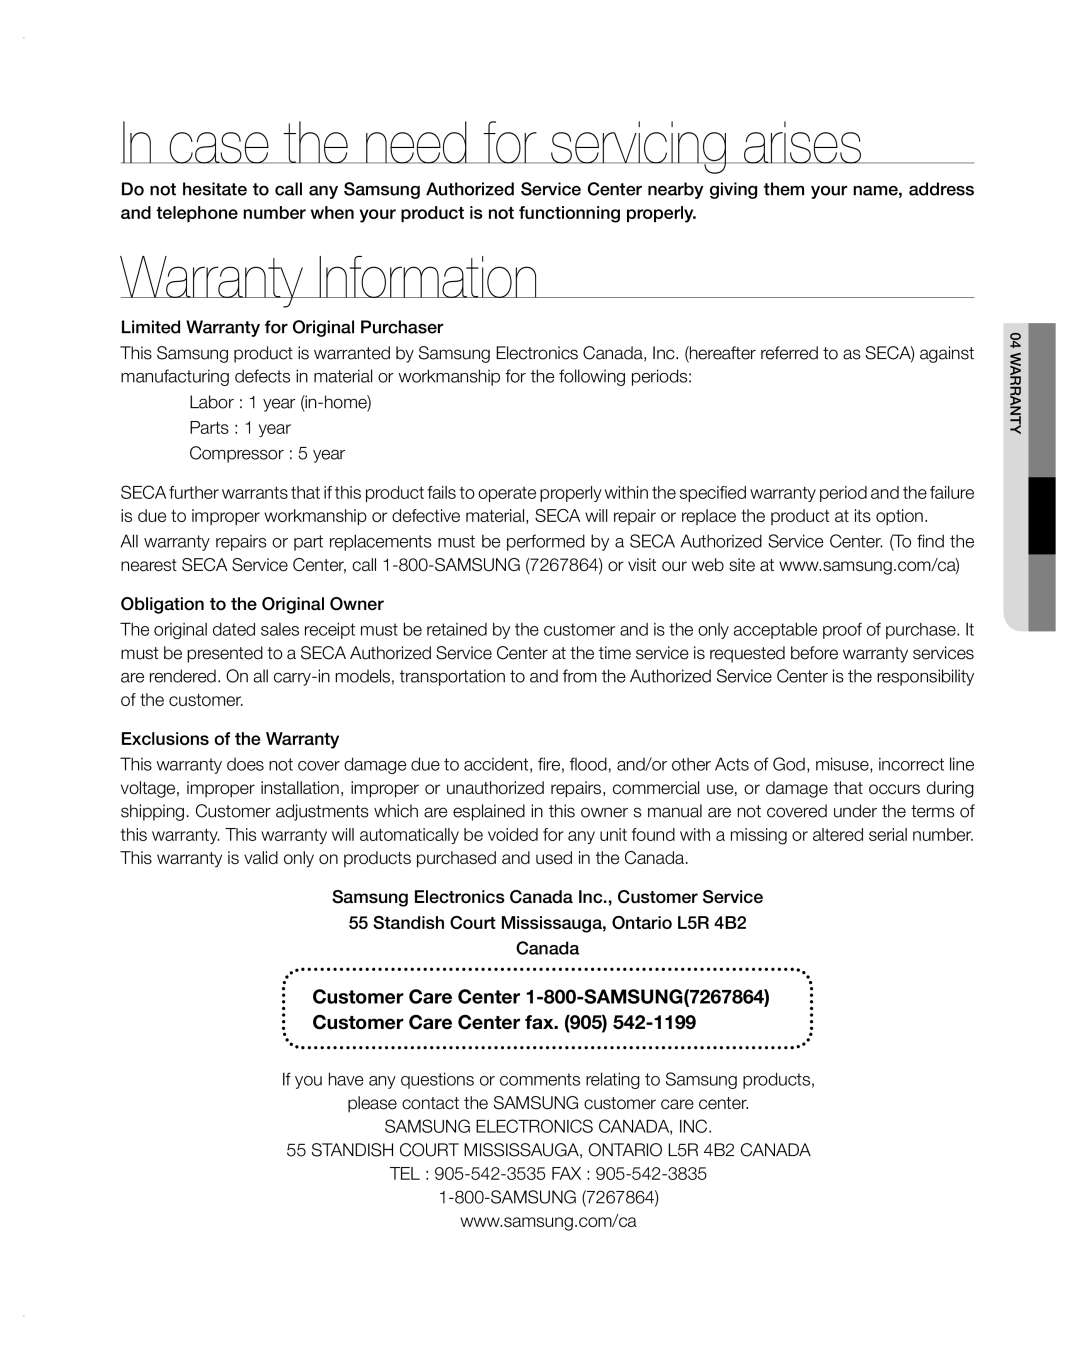 Samsung RFG297AA user manual Warranty Information, In case the need for servicing arises, Customer Care Center fax 